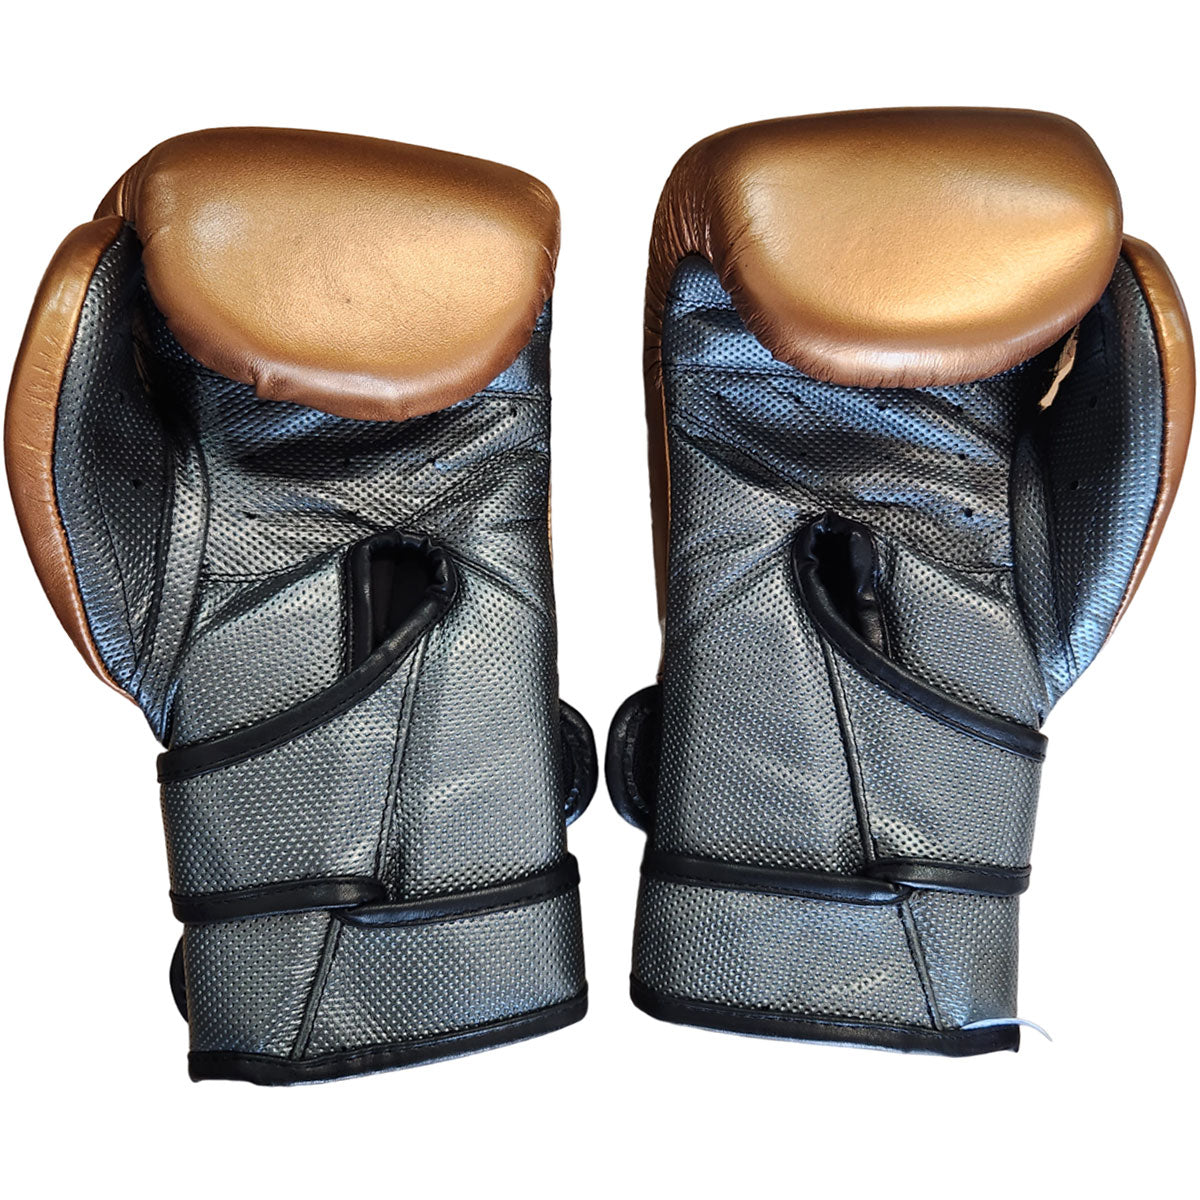 Boxing Gloves Cleto Reyes Hero Double Loop Cooper Oxford-Gray